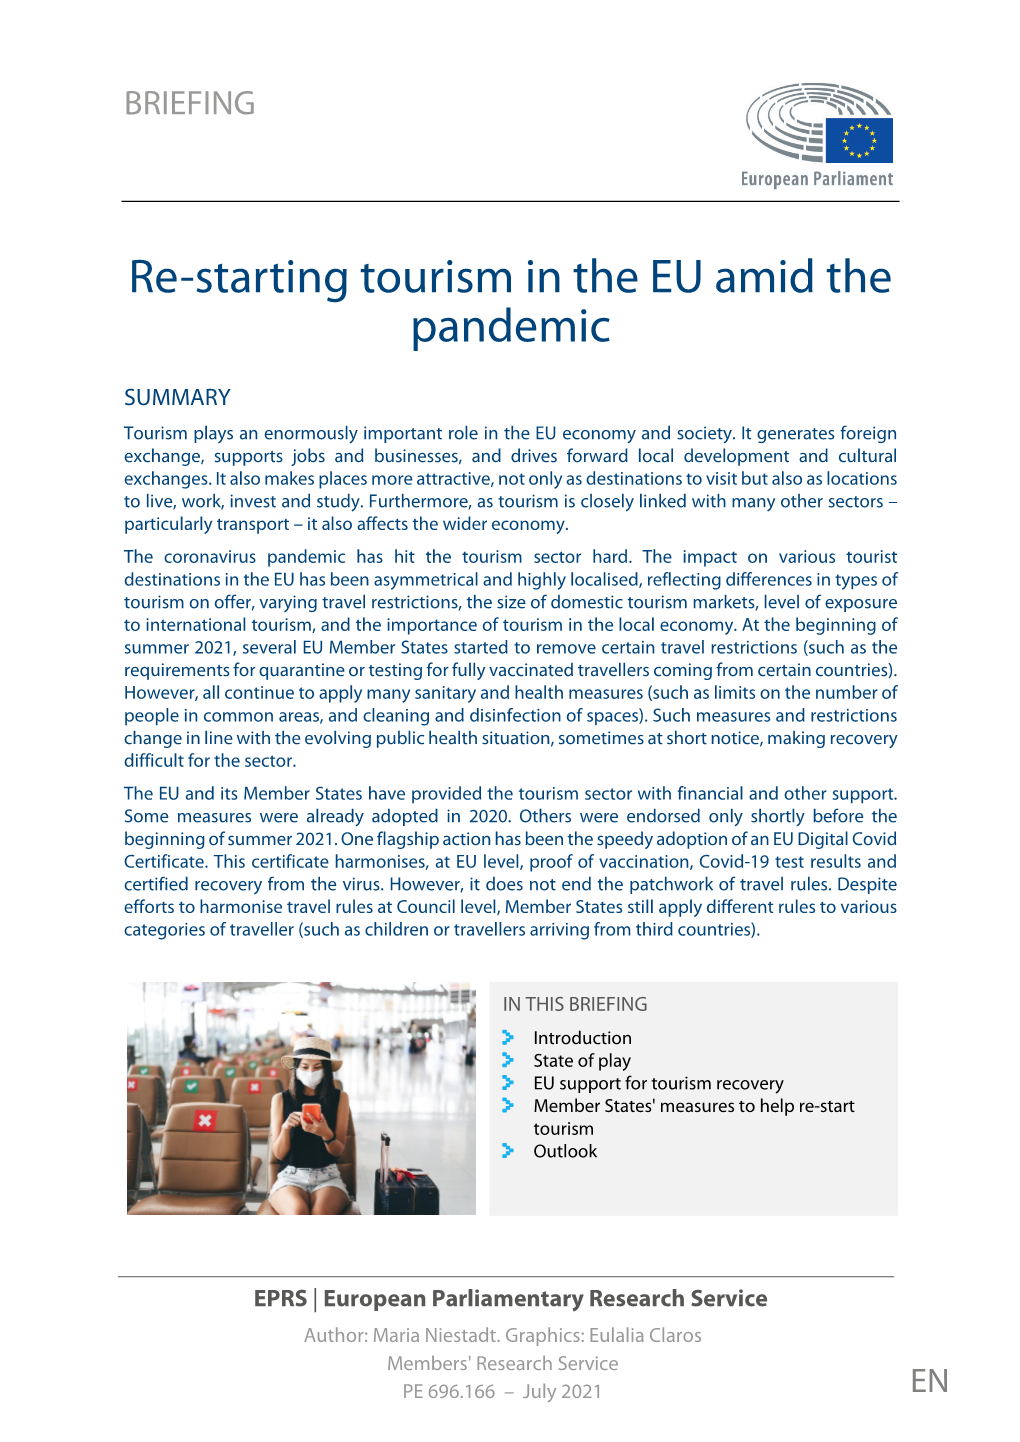 Re-Starting Tourism in the EU Amid the Pandemic